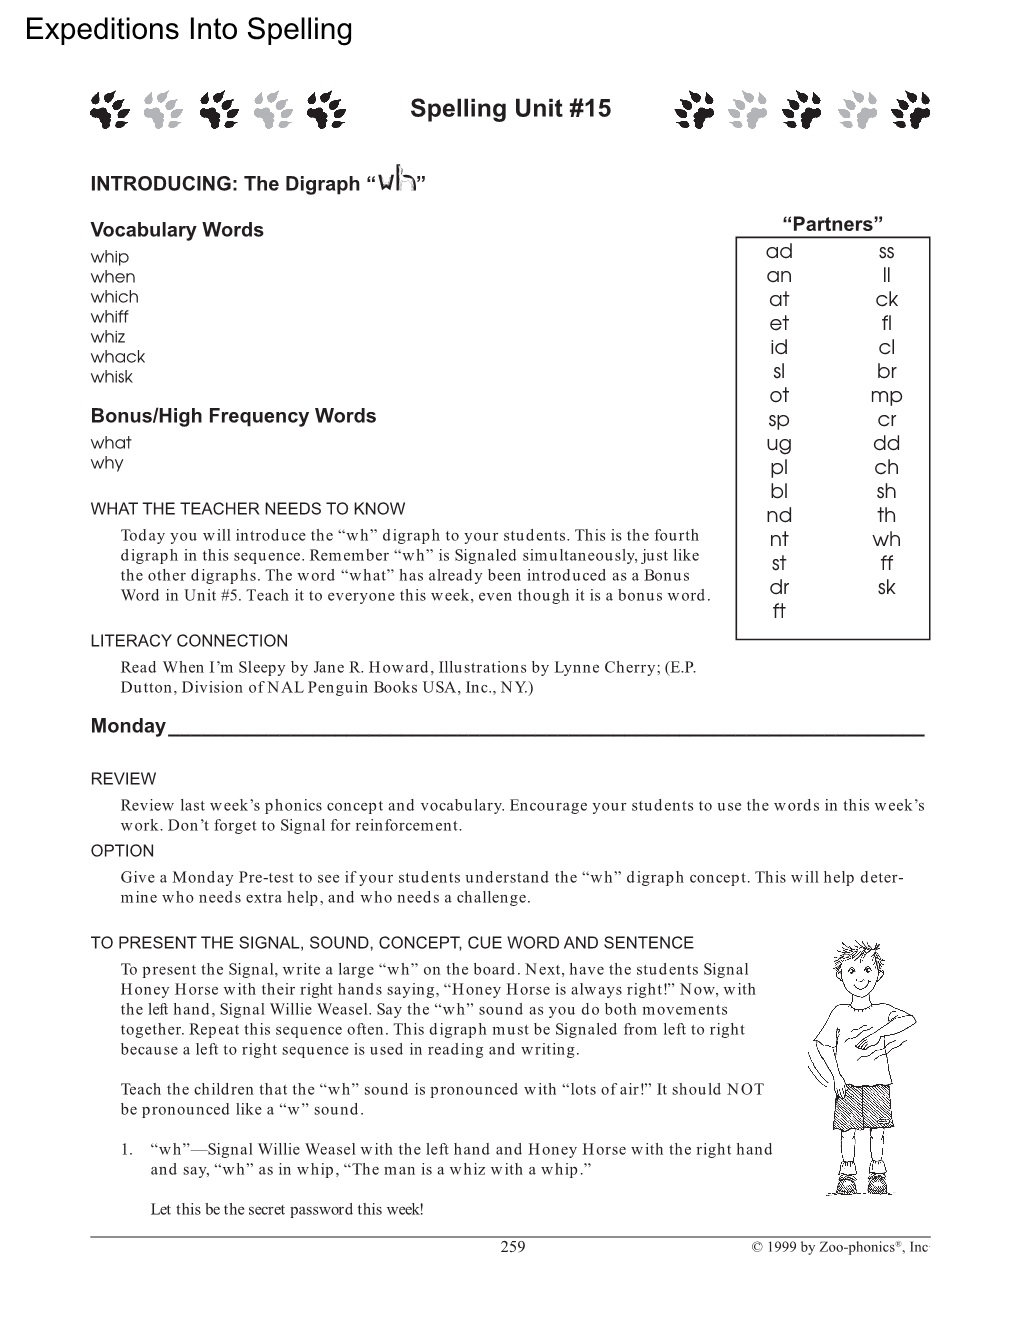 Expeditions Into Spelling, Unit #17 and in the Zoo-Phonics® Language Arts Resource Manual, Chapter #11